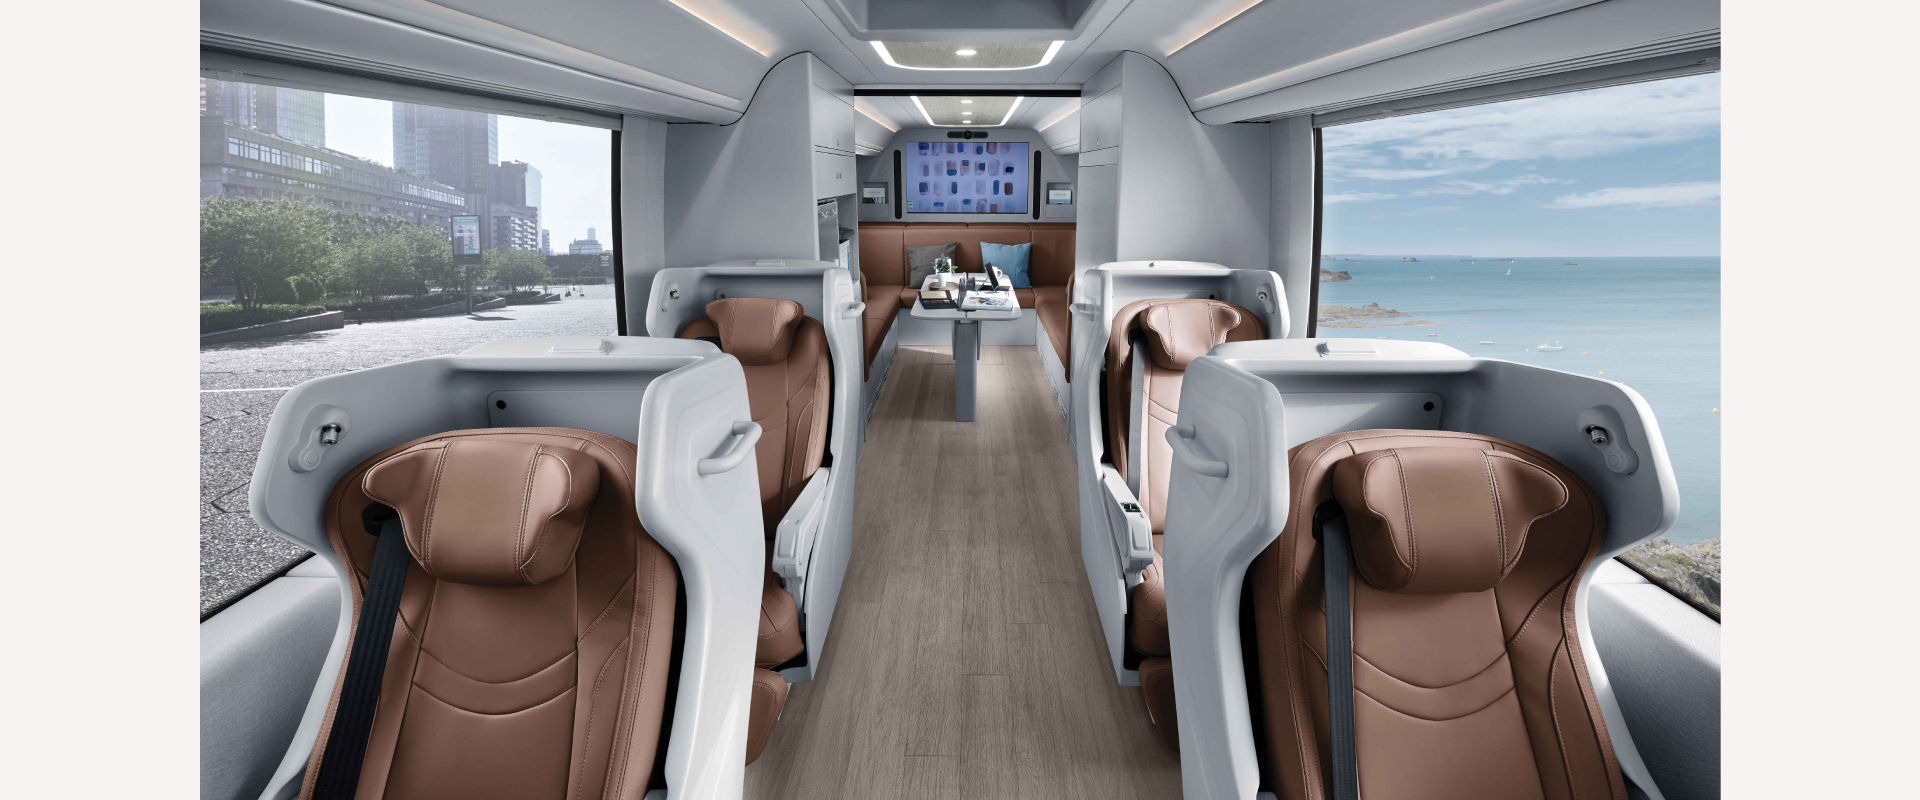 Hyundai Motor’s New Universe Mobile Office Takes Remote Work to the Next Level of Mobility and Luxury